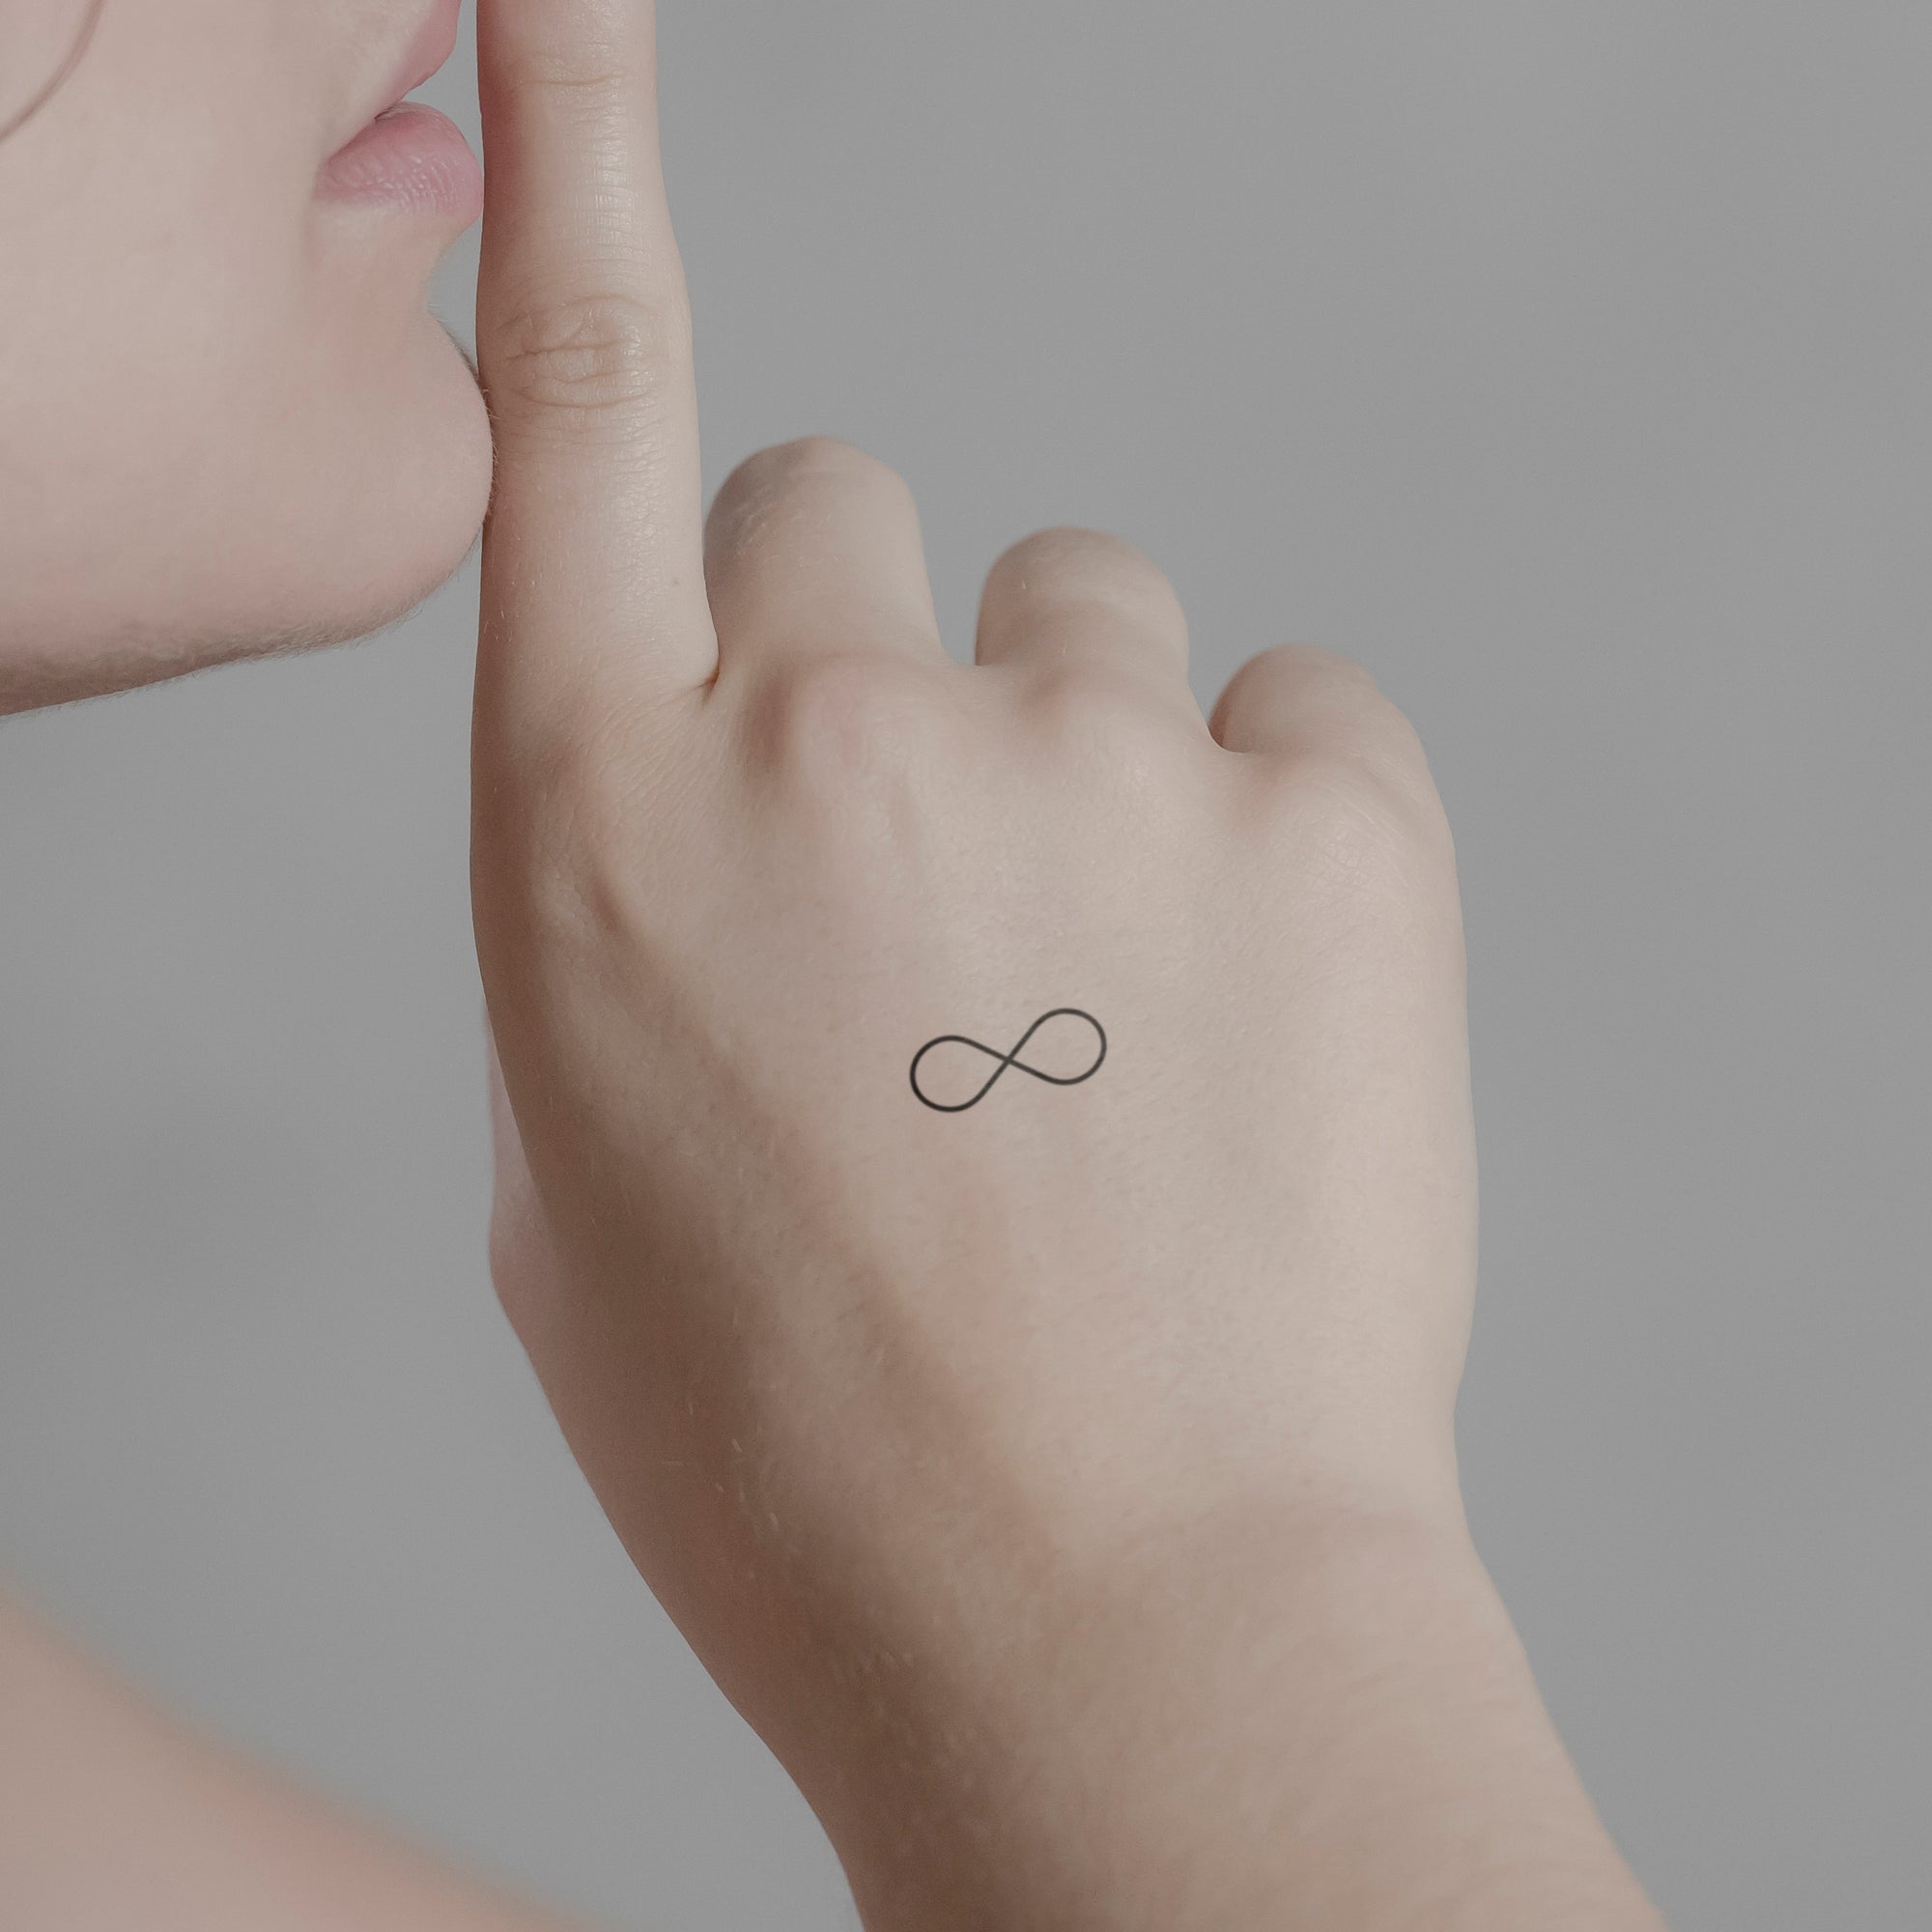 Infinity Tattoo Designs Photos and Images & Pictures | Shutterstock